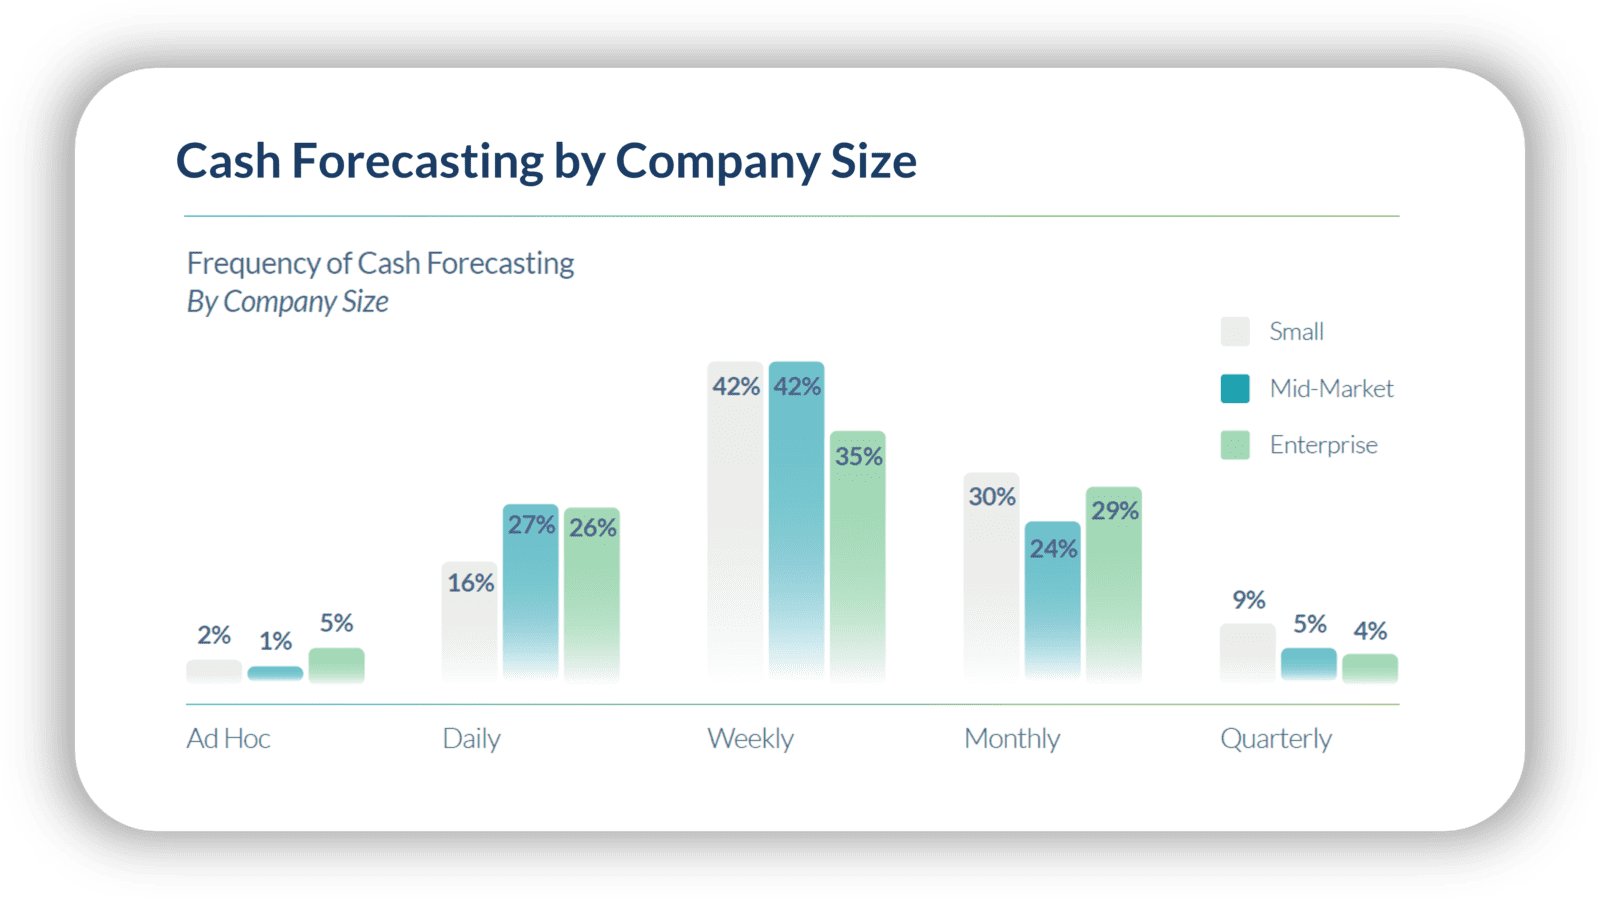 Cash forecasting trends for treasury in 2023 based on company size. 